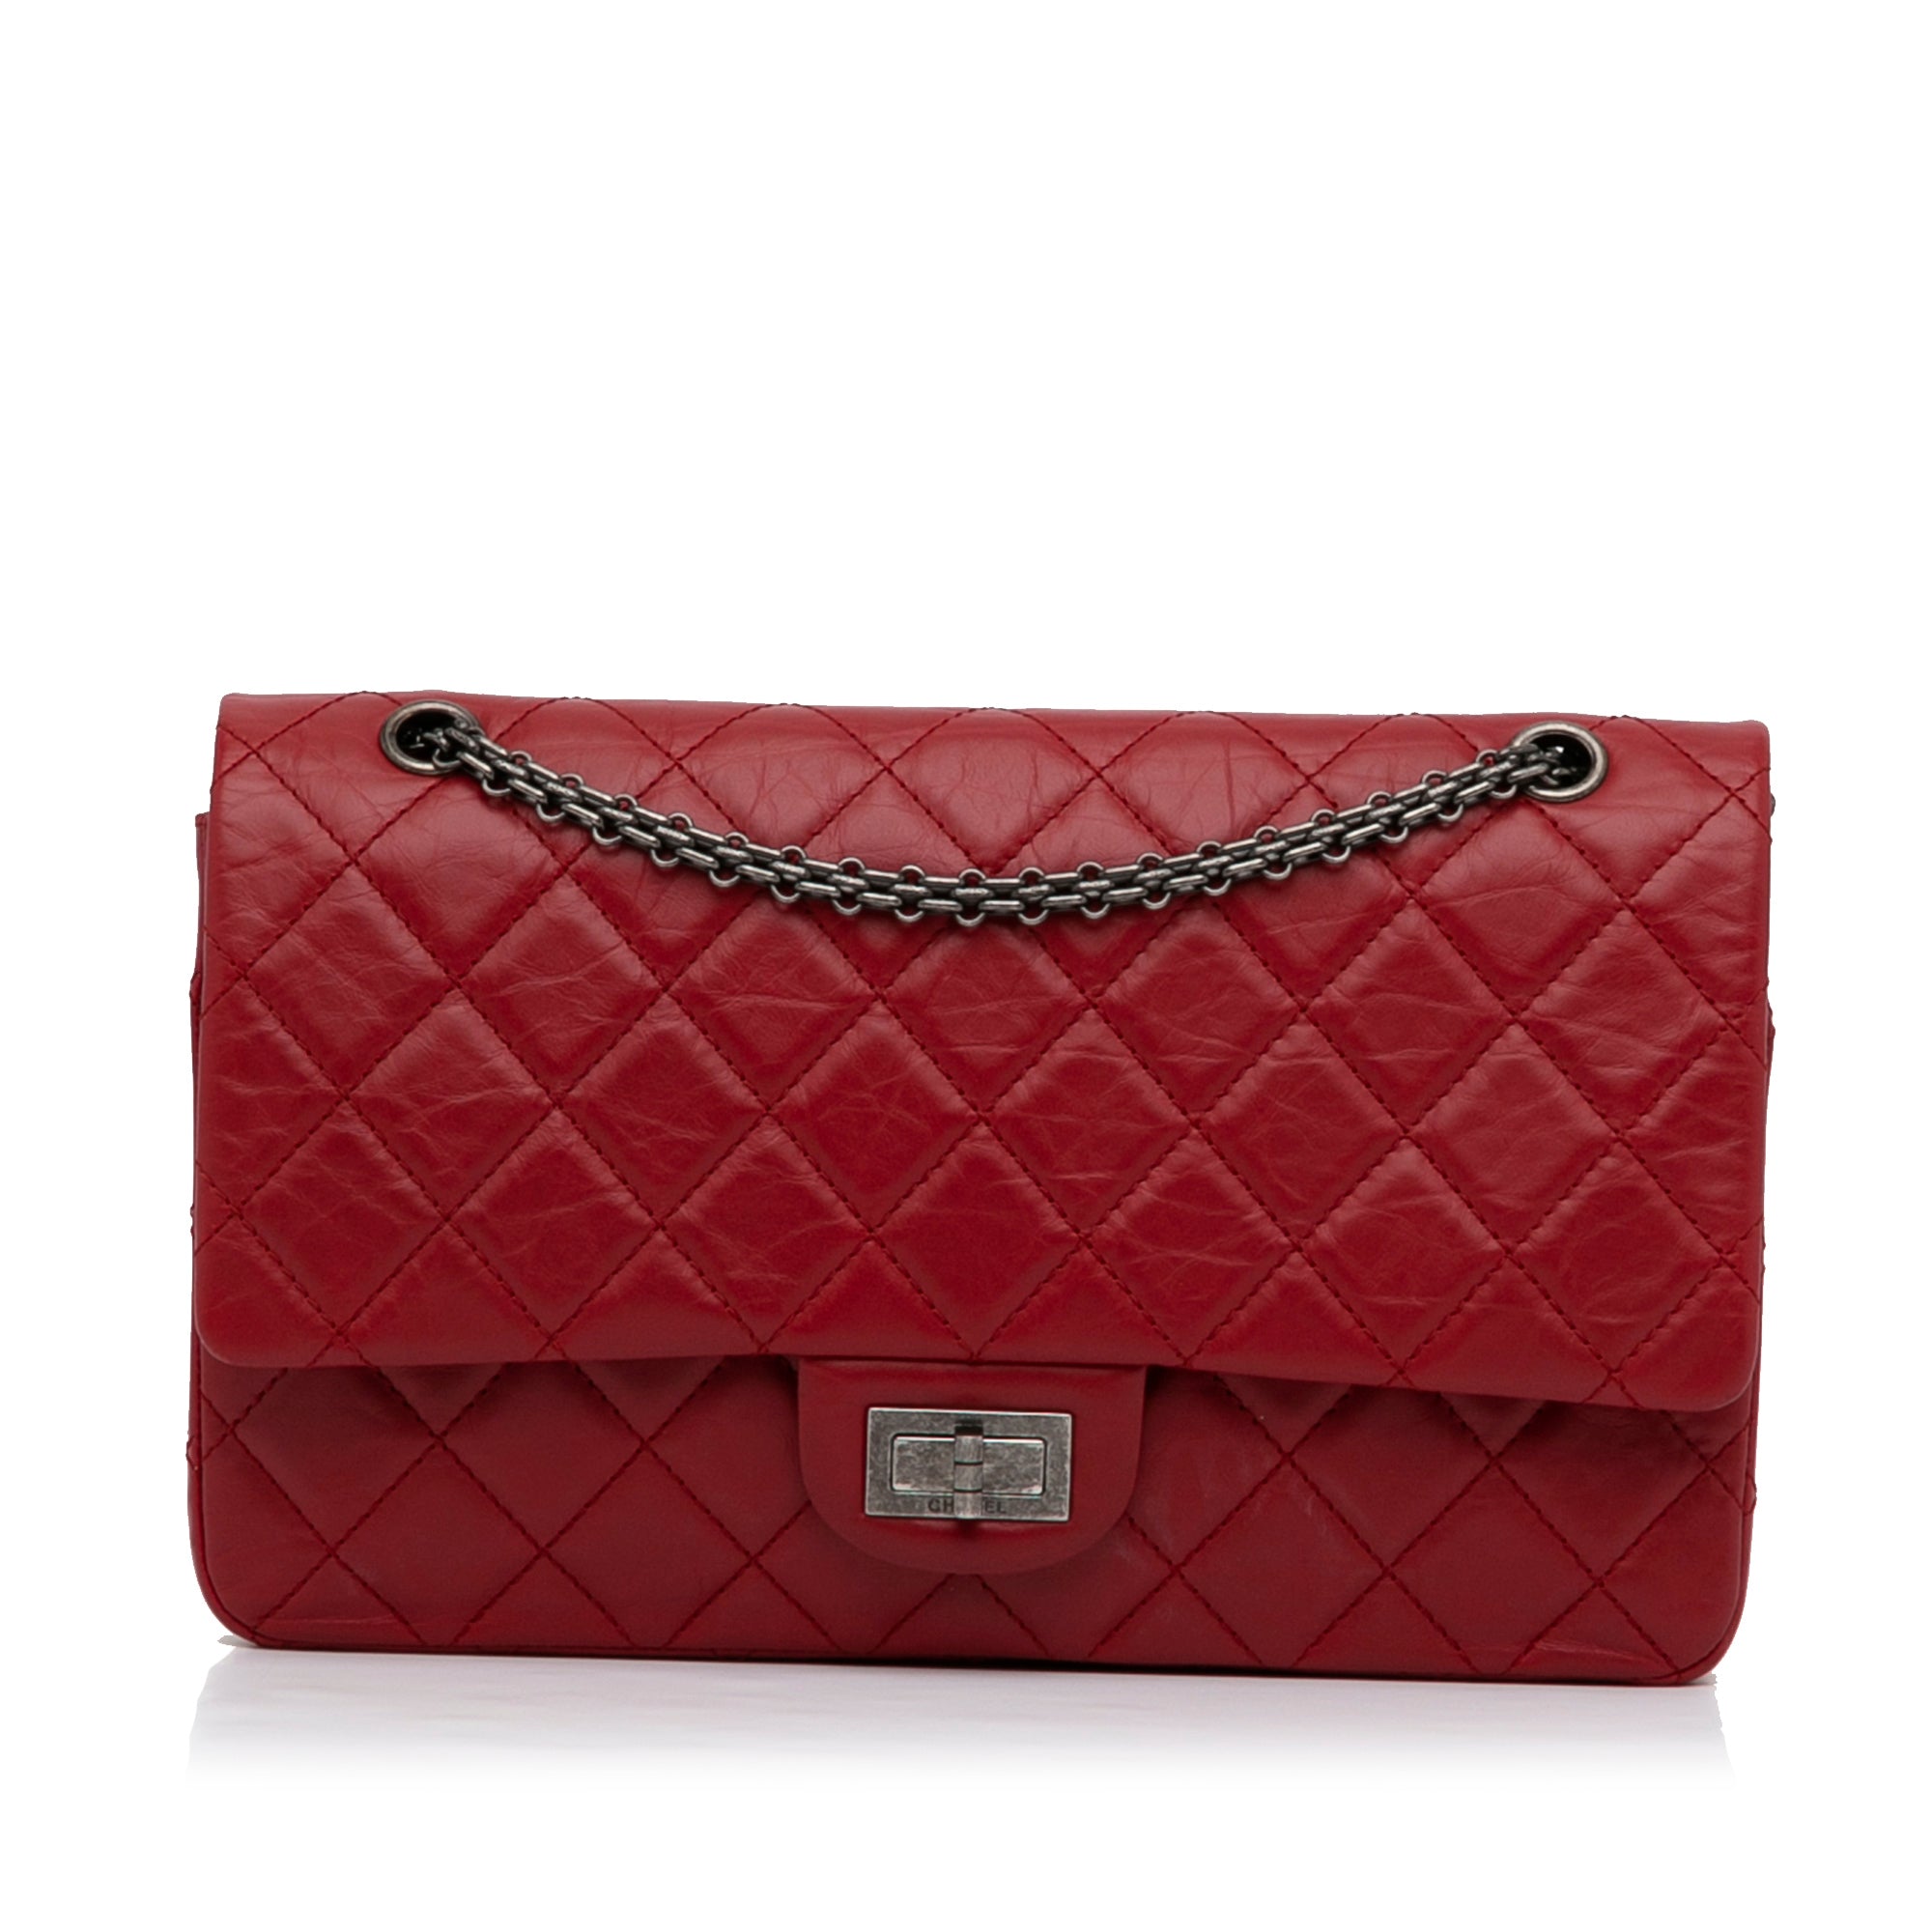 Chanel - Authenticated 2.55 Handbag - Leather Red Plain for Women, Good Condition